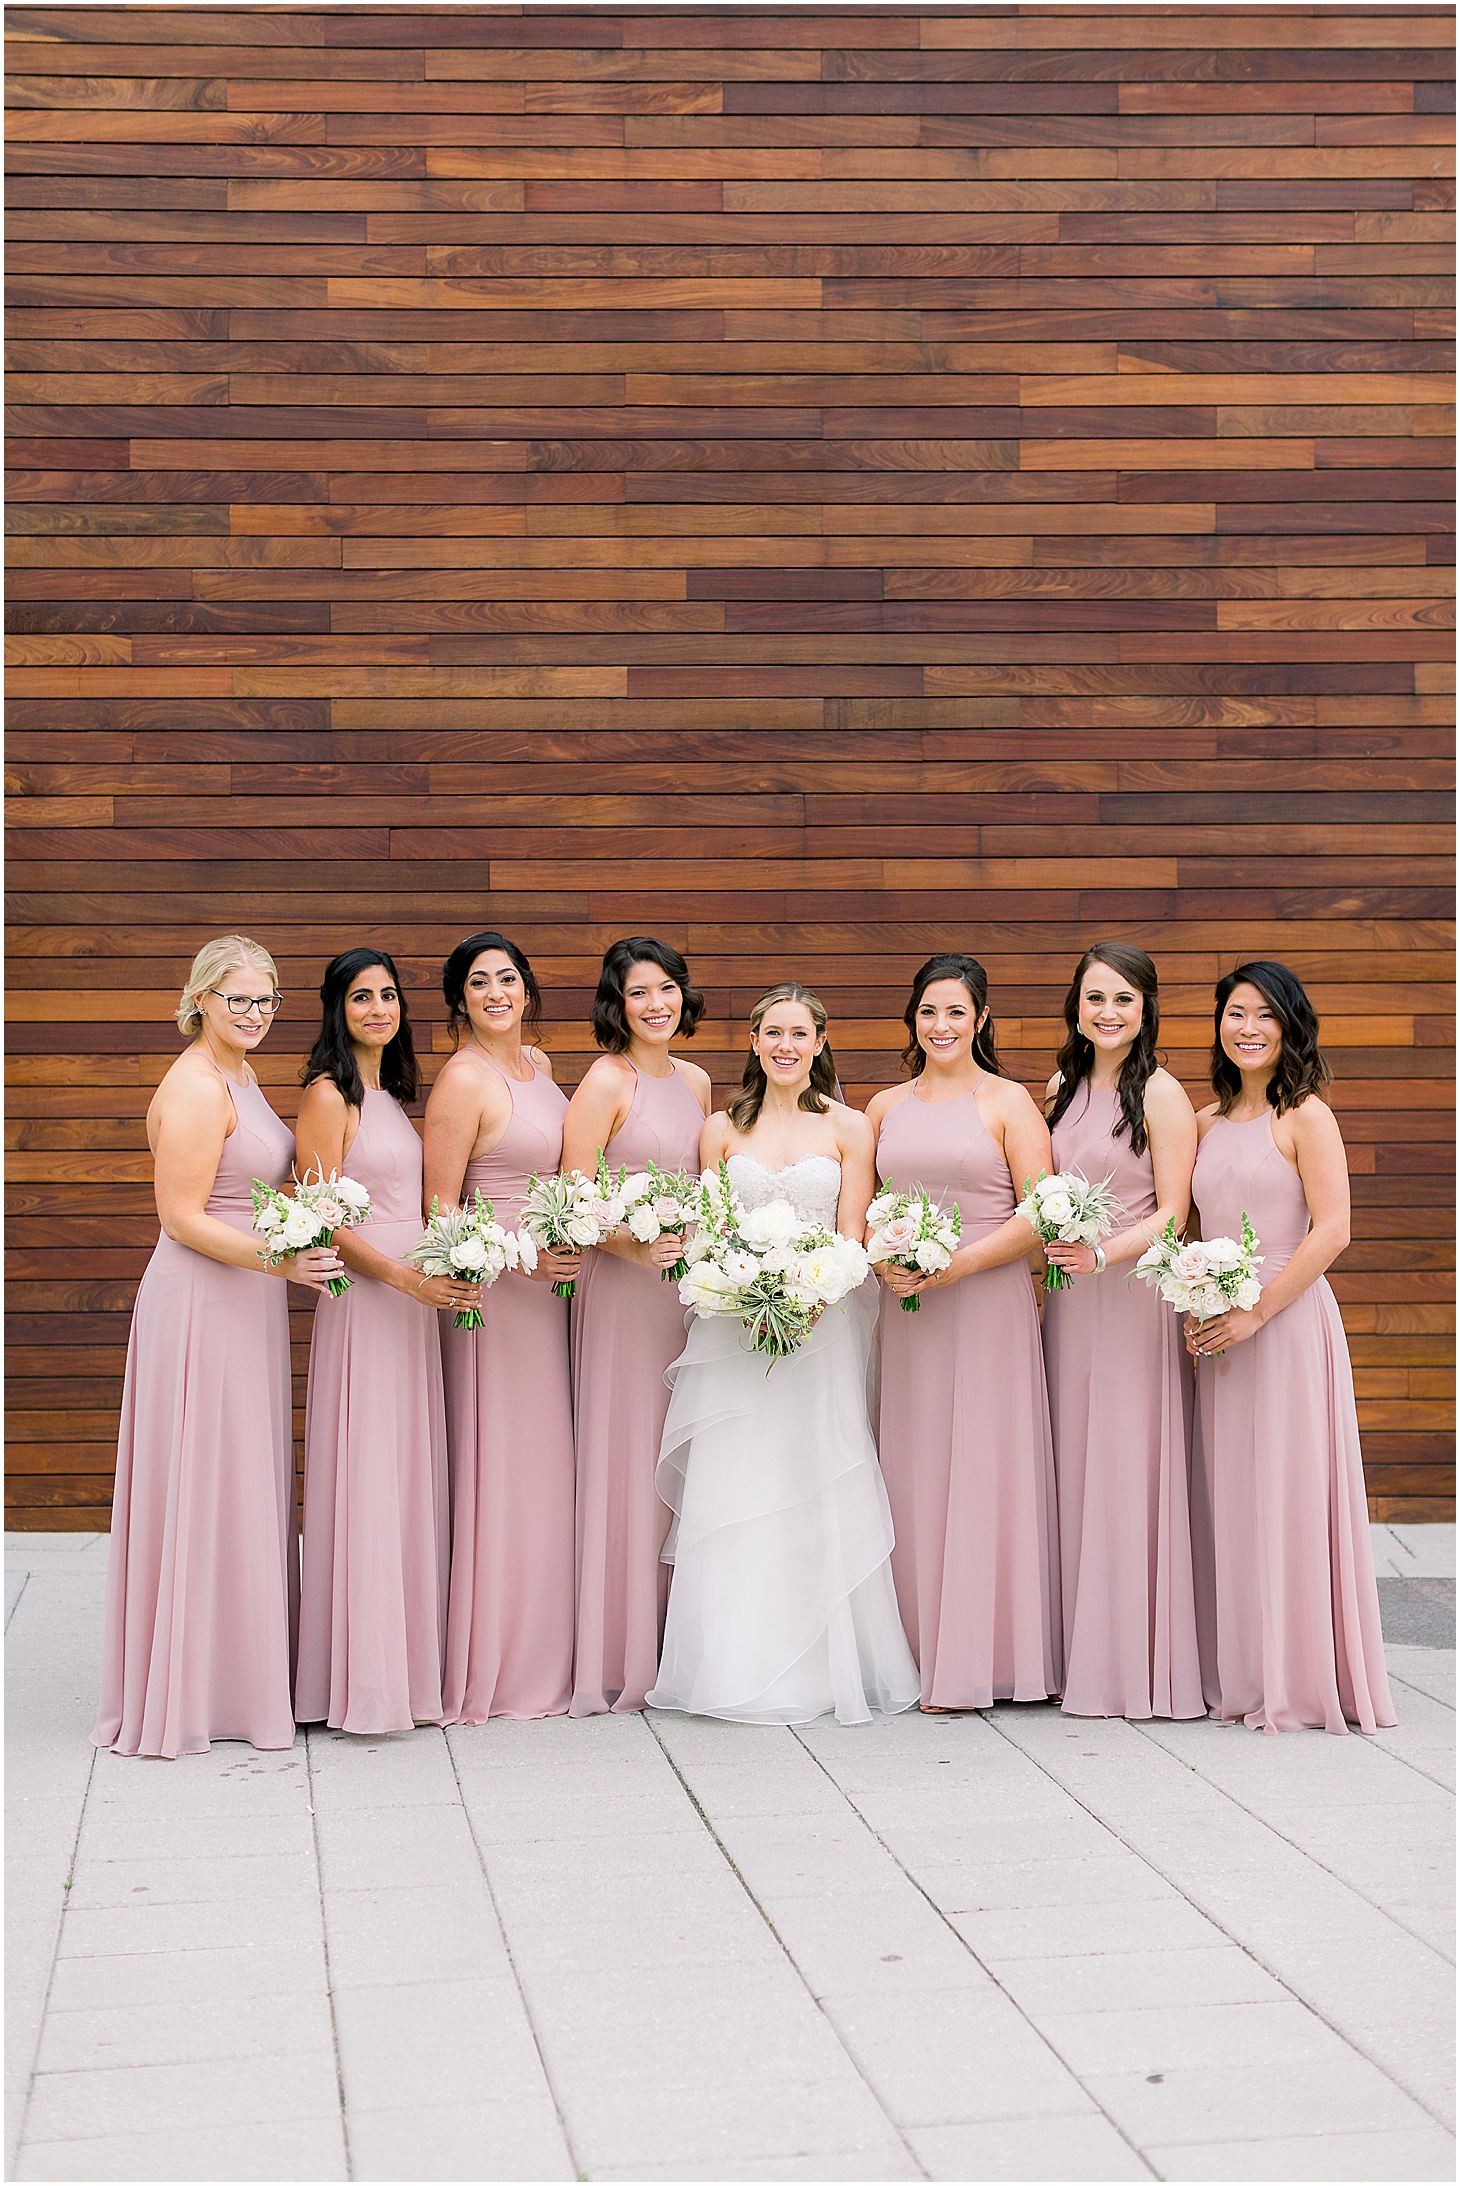 Bridal Party in Jenny Yoo at District Winery in DC,Modern Textural Spring Wedding at District Winery, Sarah Bradshaw Photography, DC Wedding Photographer